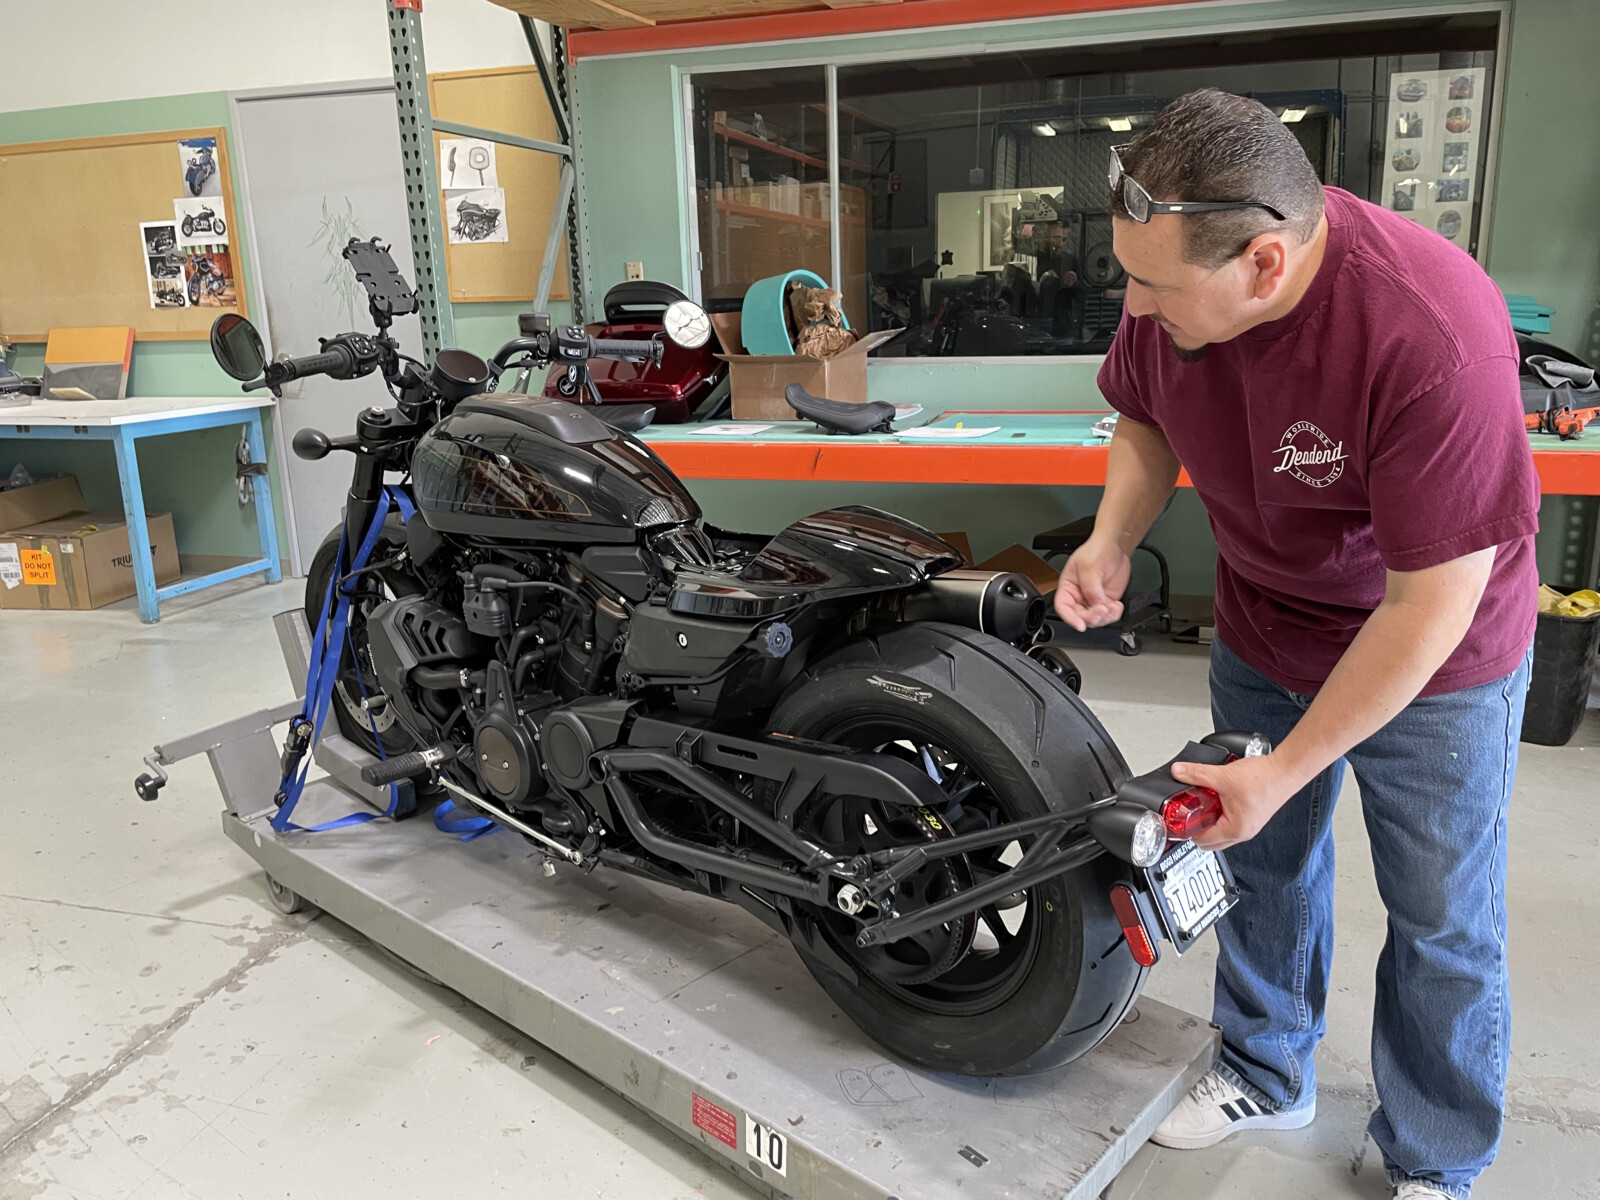 Vince working on HD 1250 Sportster S